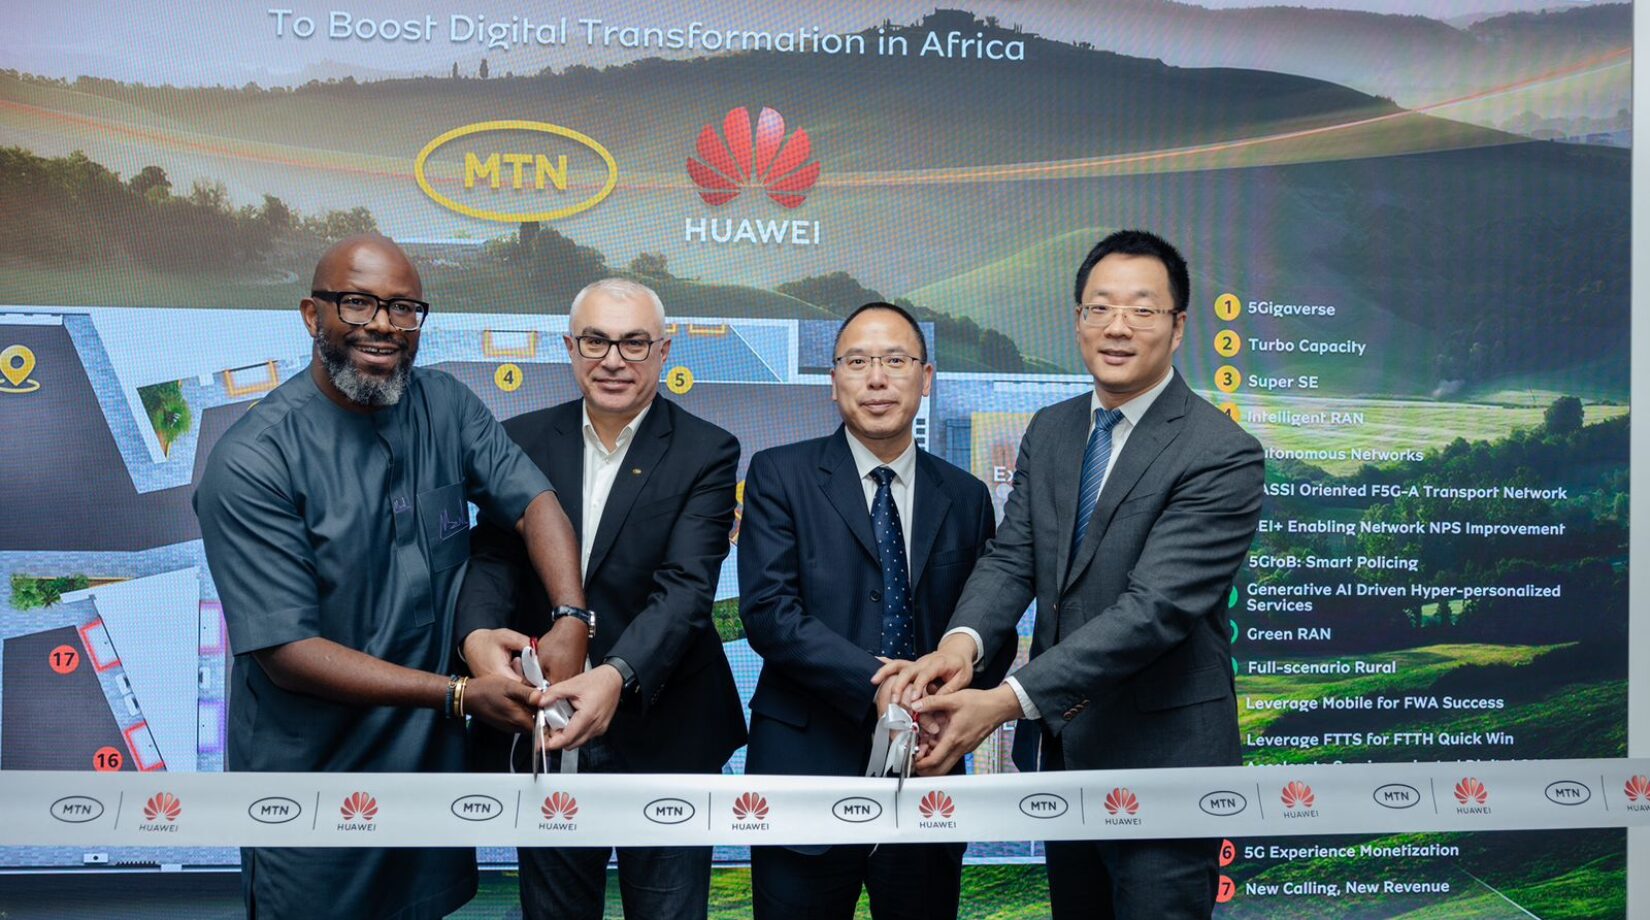 MTN and Huawei launch Joint Technology Innovation Lab to drive Africa’s digital transformation and sustainable development.